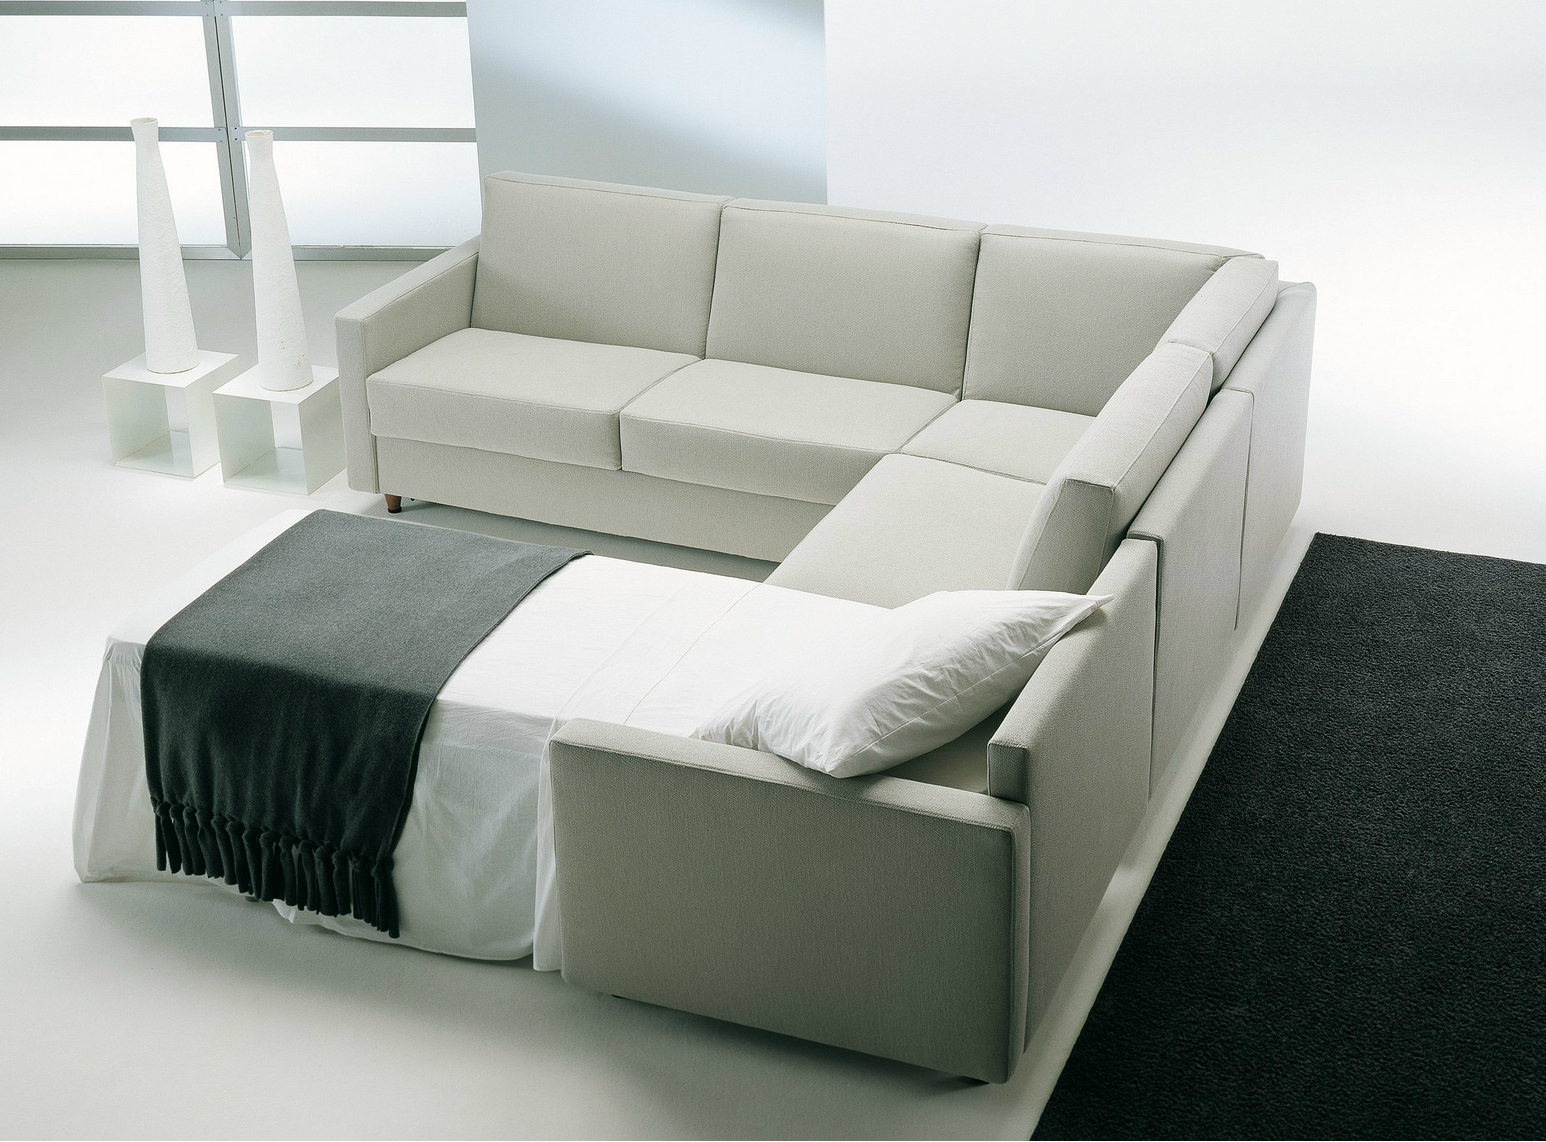 Modern Living By Excellent Modern Living Room Design By Prodotti With White Colored Convertible Sofa White Pillows And Black Floor Mat Decoration Comfortable And Contemporary Convertible Sofa In Soft Color Schemes